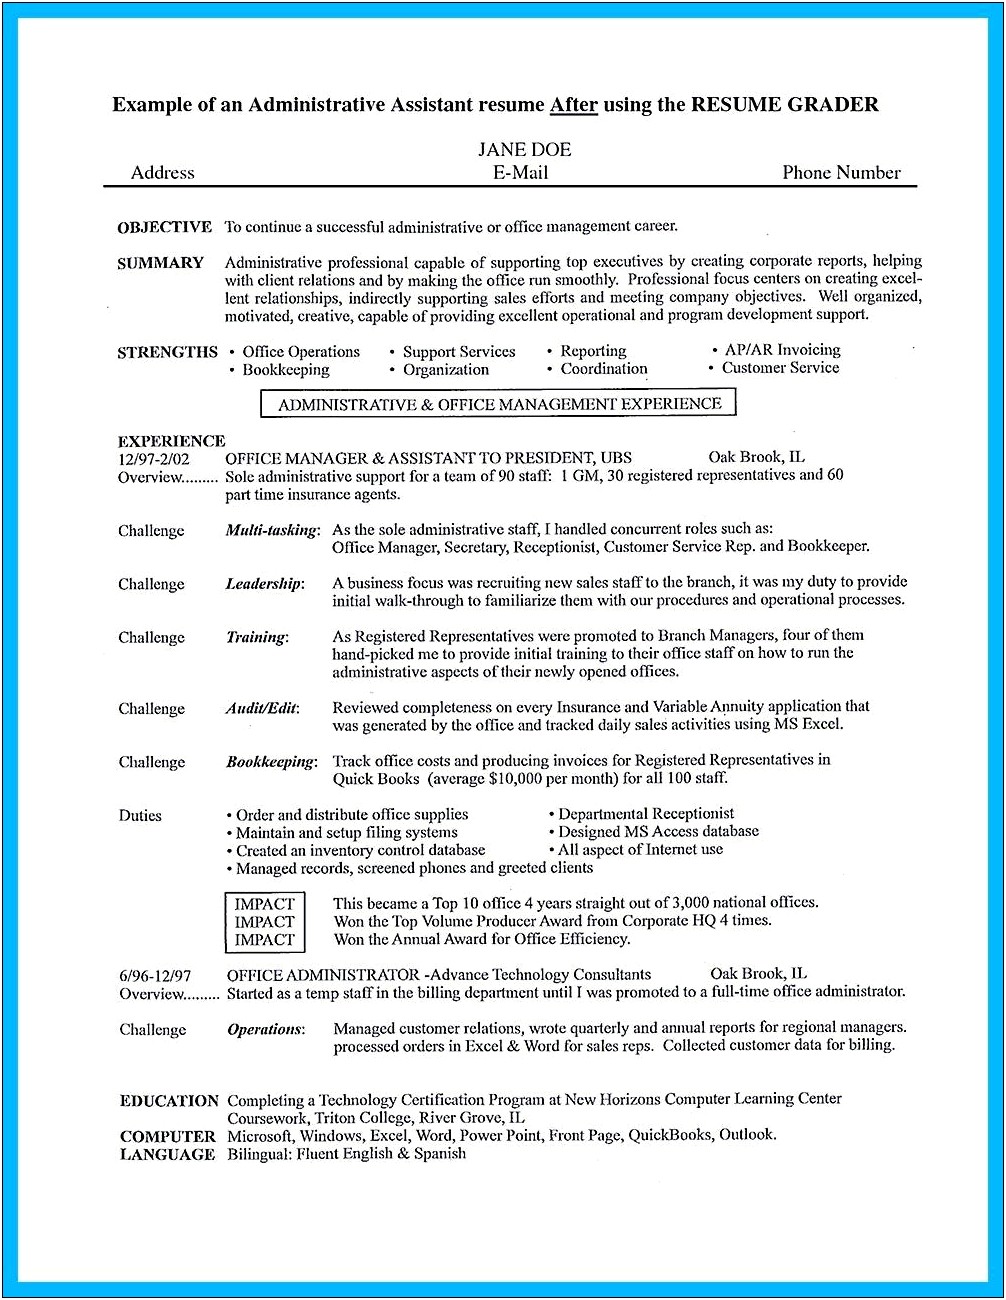 Resume Objective Statements For Administrative Professional